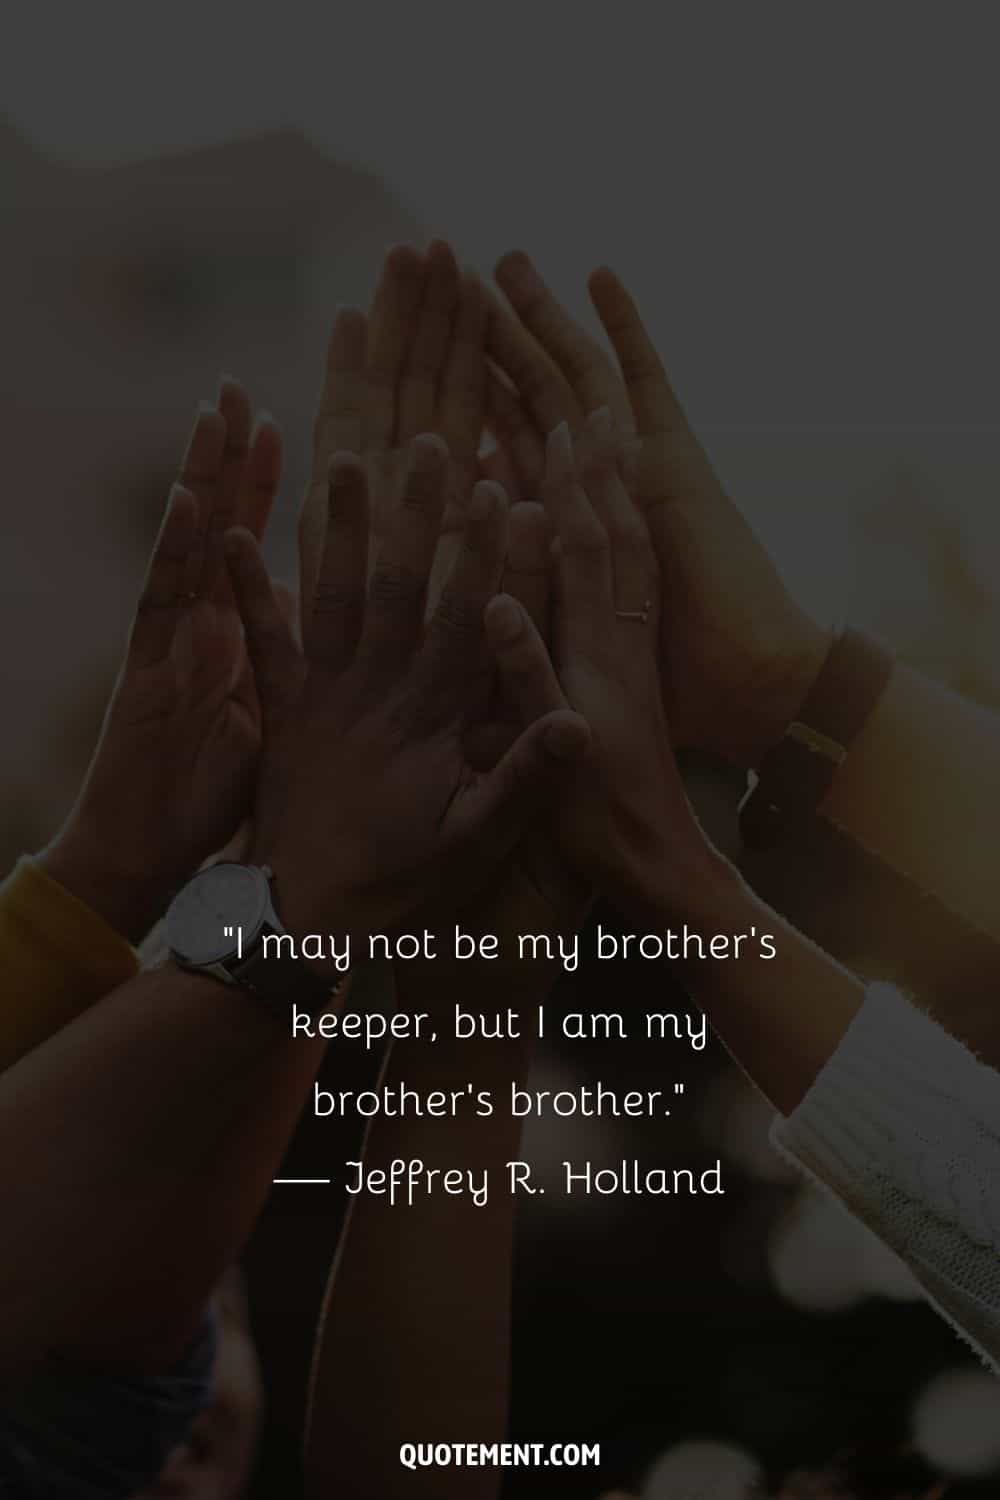 “I may not be my brother's keeper, but I am my brother's brother.” — Jeffrey R. Holland